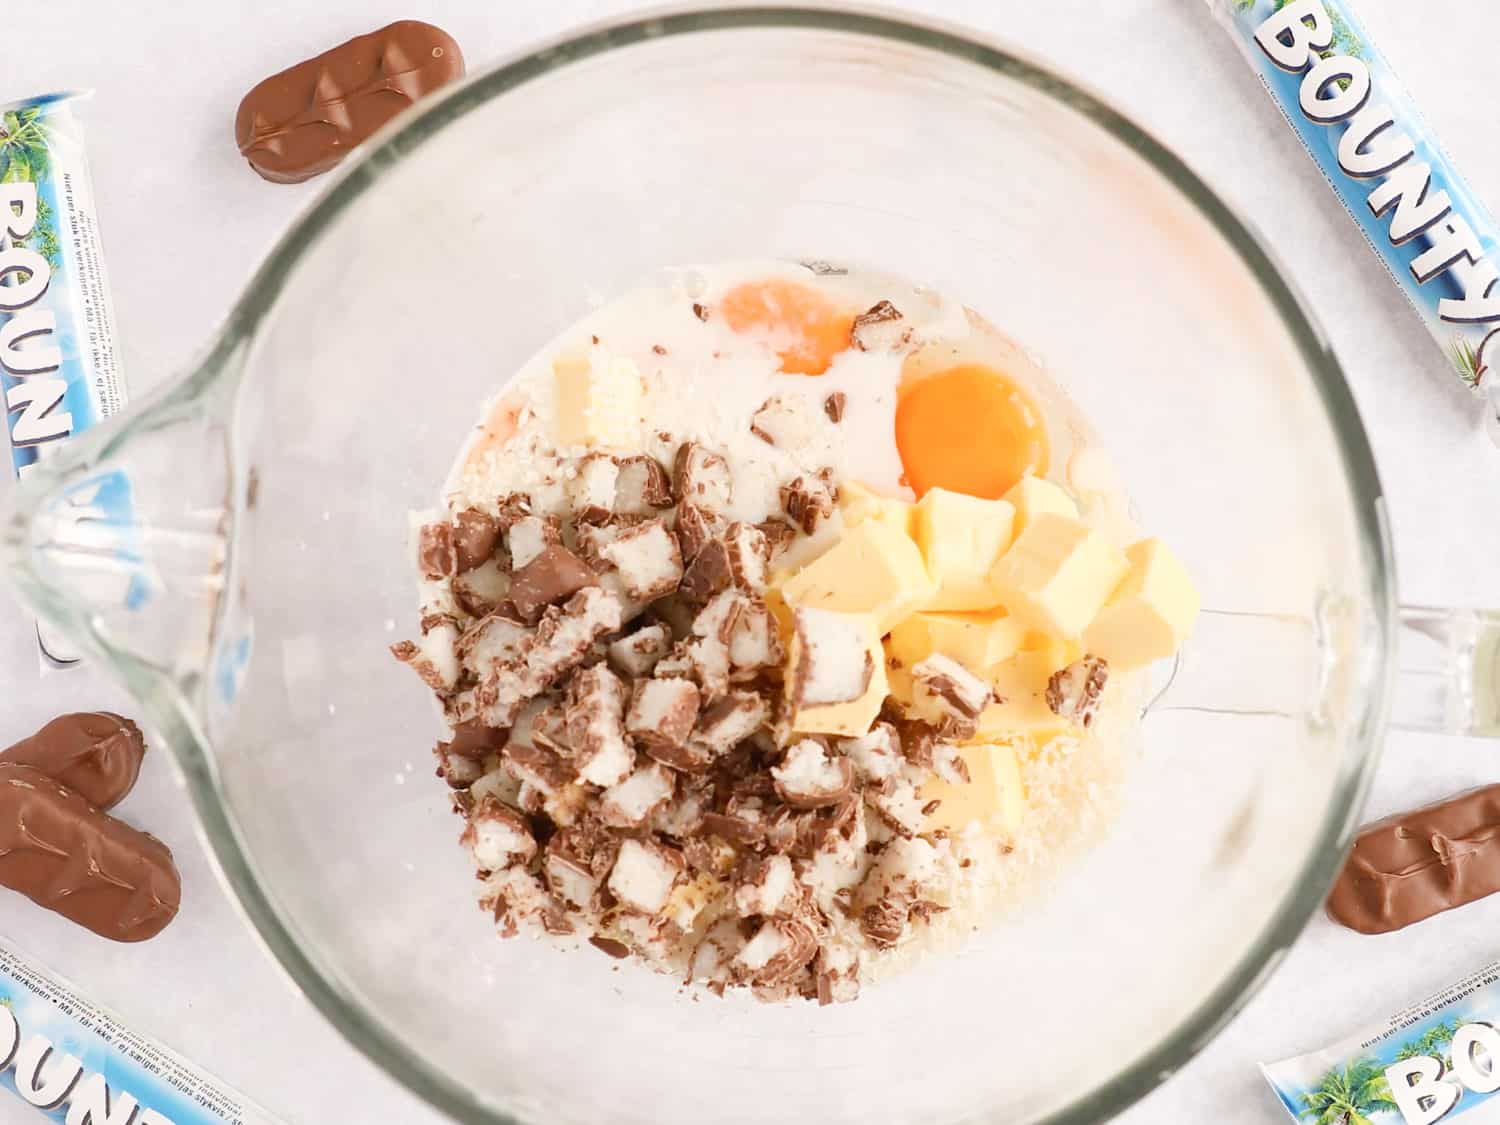 A mixing bowl with butter, sugar, eggs, flour and chopped Bounty bars